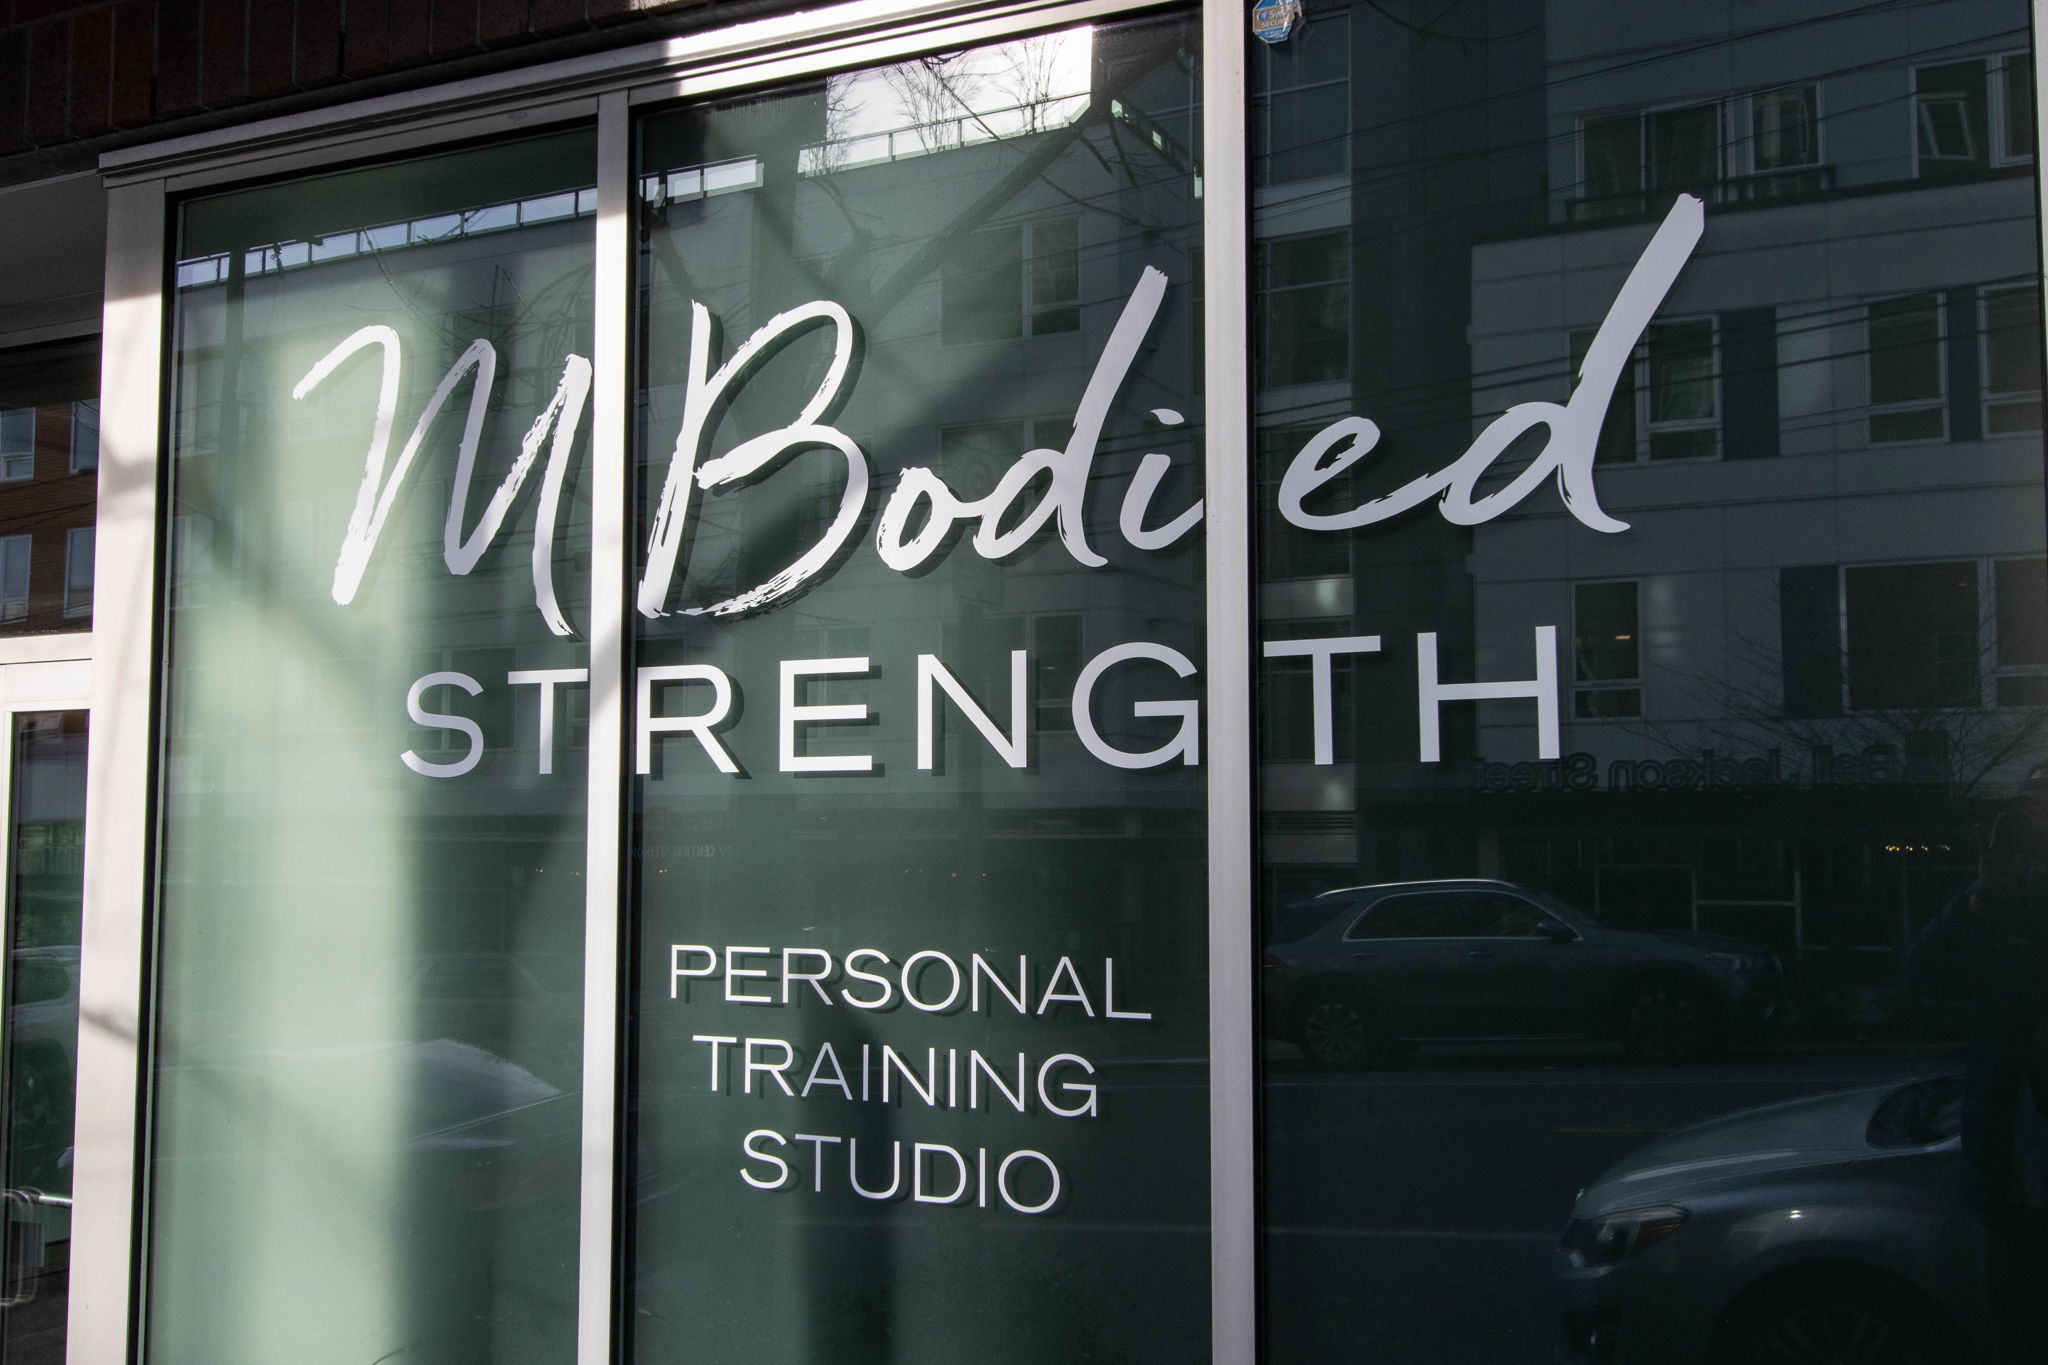 MBODIED STRENGTH PERSONAL TRAINING STUDIO